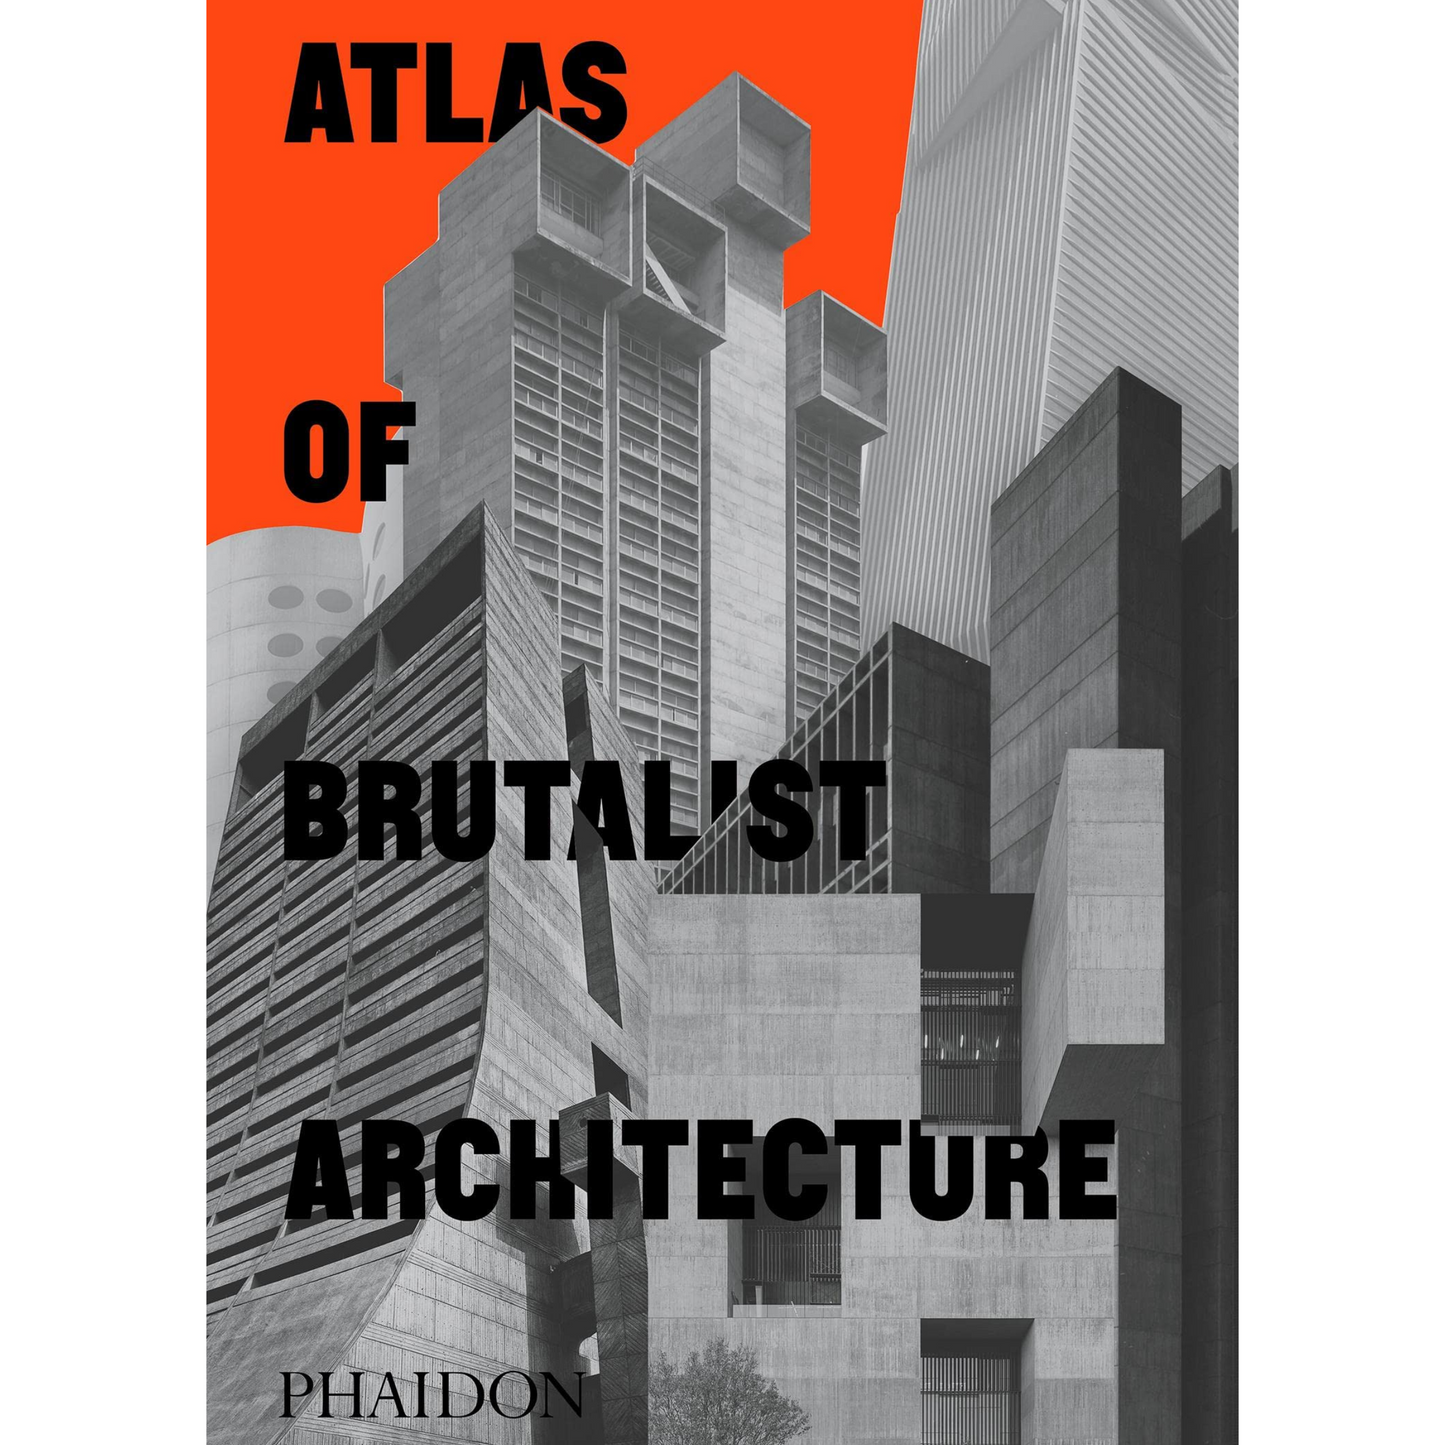 Atlas of Brutalist Architecture book front cover featuring overlapping brutalist grey buildings and a bright red background